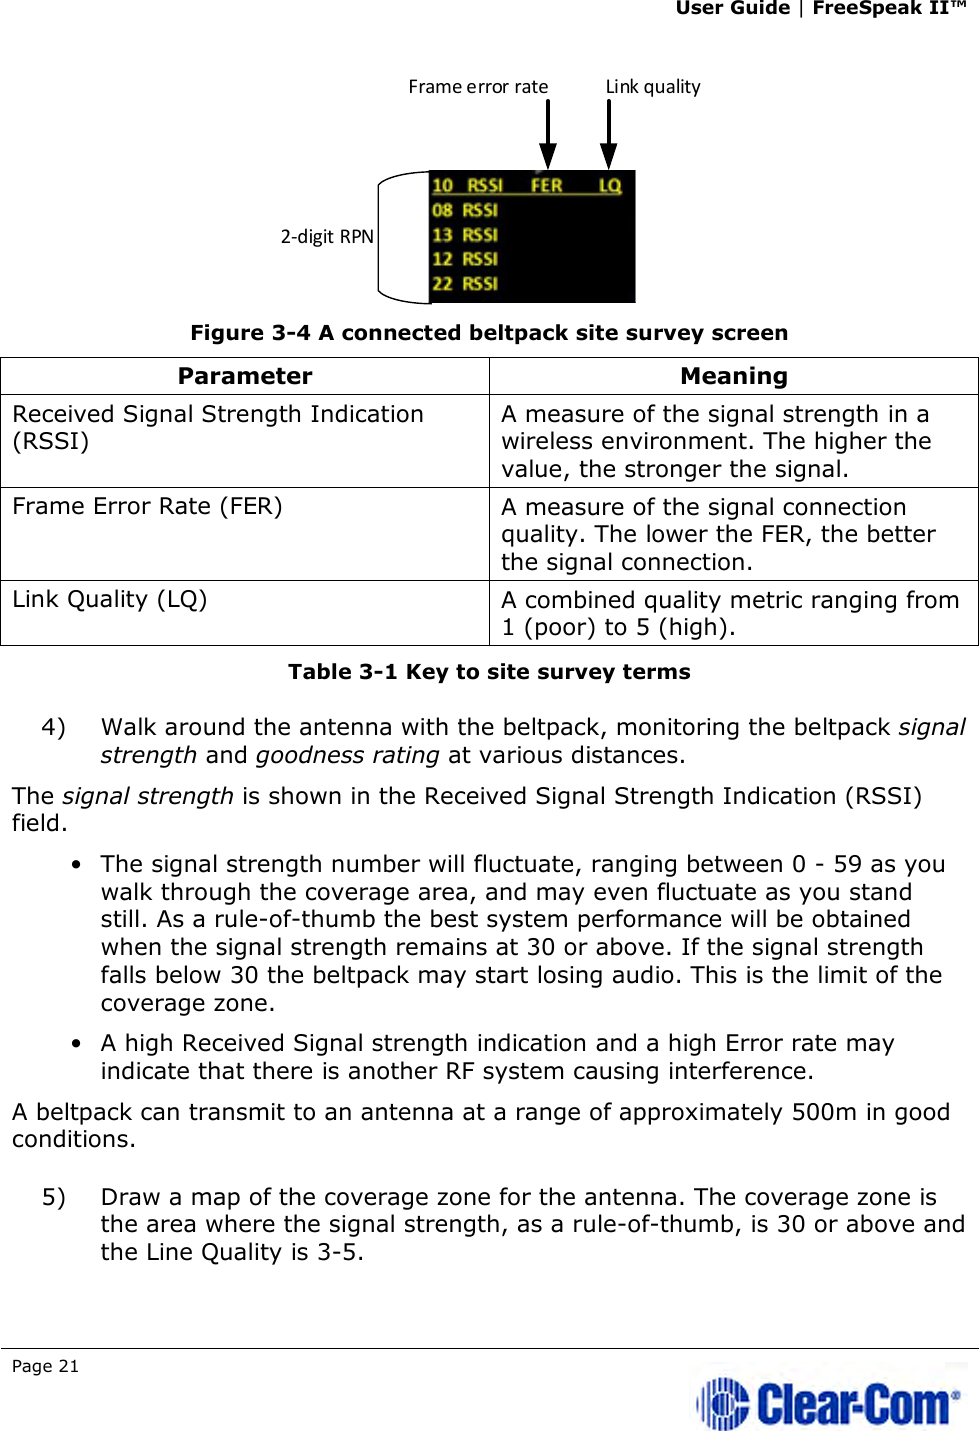 User Guide | FreeSpeak II™  Page 21    Figure 3-4 A connected beltpack site survey screen Parameter  Meaning Received Signal Strength Indication (RSSI) A measure of the signal strength in a wireless environment. The higher the value, the stronger the signal. Frame Error Rate (FER)  A measure of the signal connection quality. The lower the FER, the better the signal connection. Link Quality (LQ)  A combined quality metric ranging from 1 (poor) to 5 (high). Table 3-1 Key to site survey terms 4) Walk around the antenna with the beltpack, monitoring the beltpack signal strength and goodness rating at various distances.  The signal strength is shown in the Received Signal Strength Indication (RSSI) field.  • The signal strength number will fluctuate, ranging between 0 - 59 as you walk through the coverage area, and may even fluctuate as you stand still. As a rule-of-thumb the best system performance will be obtained when the signal strength remains at 30 or above. If the signal strength falls below 30 the beltpack may start losing audio. This is the limit of the coverage zone.  • A high Received Signal strength indication and a high Error rate may indicate that there is another RF system causing interference. A beltpack can transmit to an antenna at a range of approximately 500m in good conditions. 5) Draw a map of the coverage zone for the antenna. The coverage zone is the area where the signal strength, as a rule-of-thumb, is 30 or above and the Line Quality is 3-5.  2-digit RPNFrame error rate Link quality